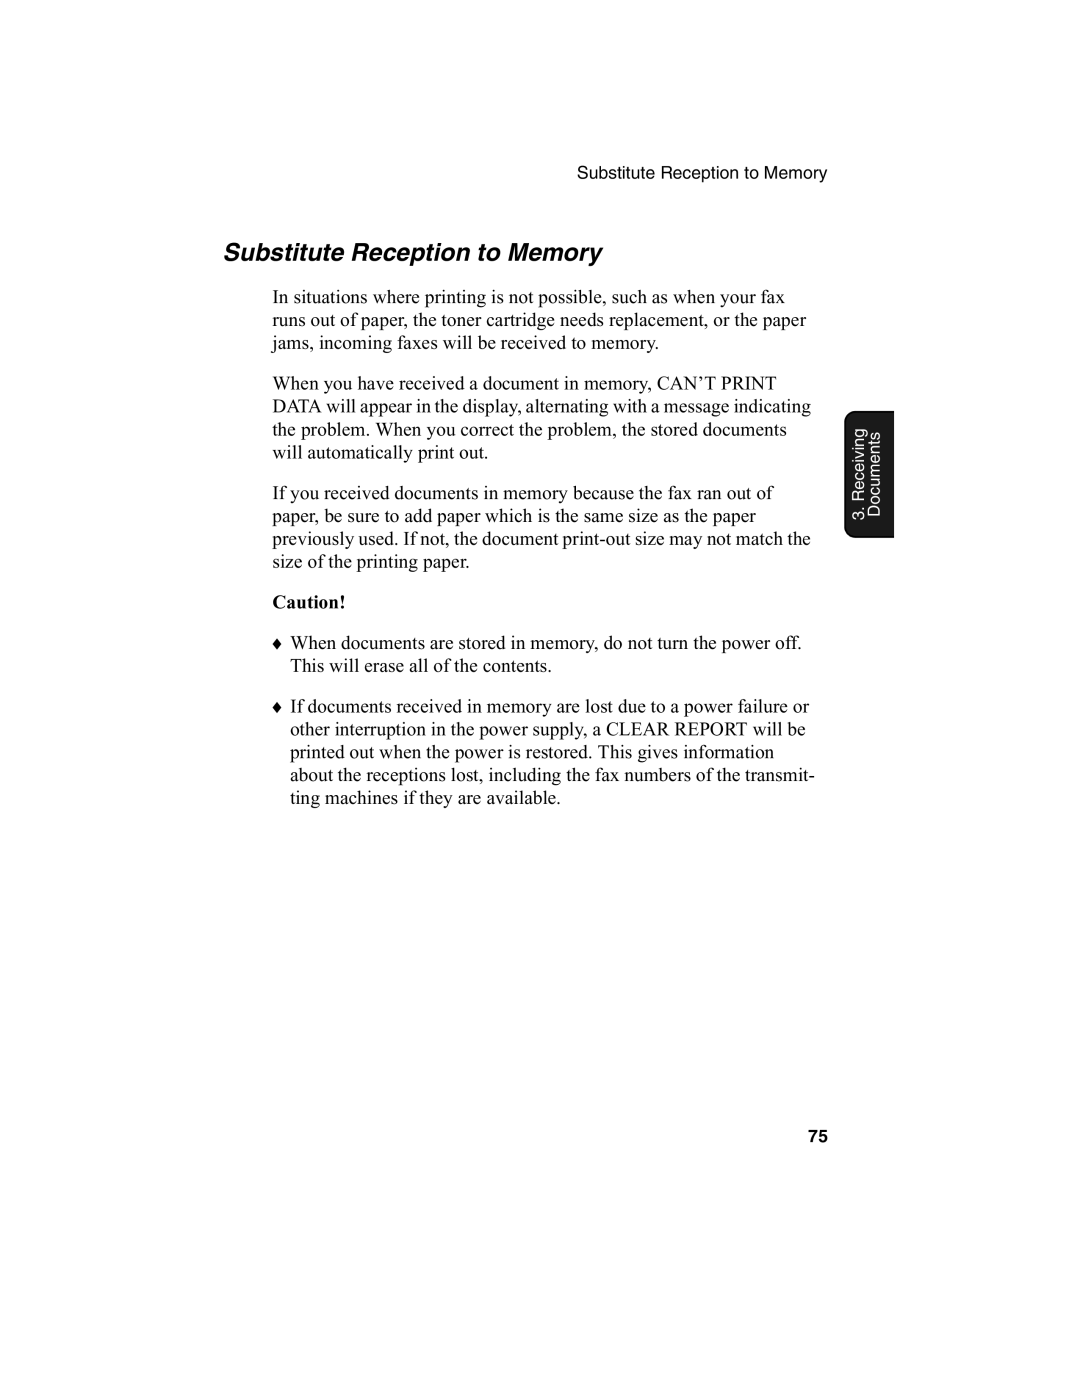 Sharp FO-2970M operation manual Substitute Reception to Memory 